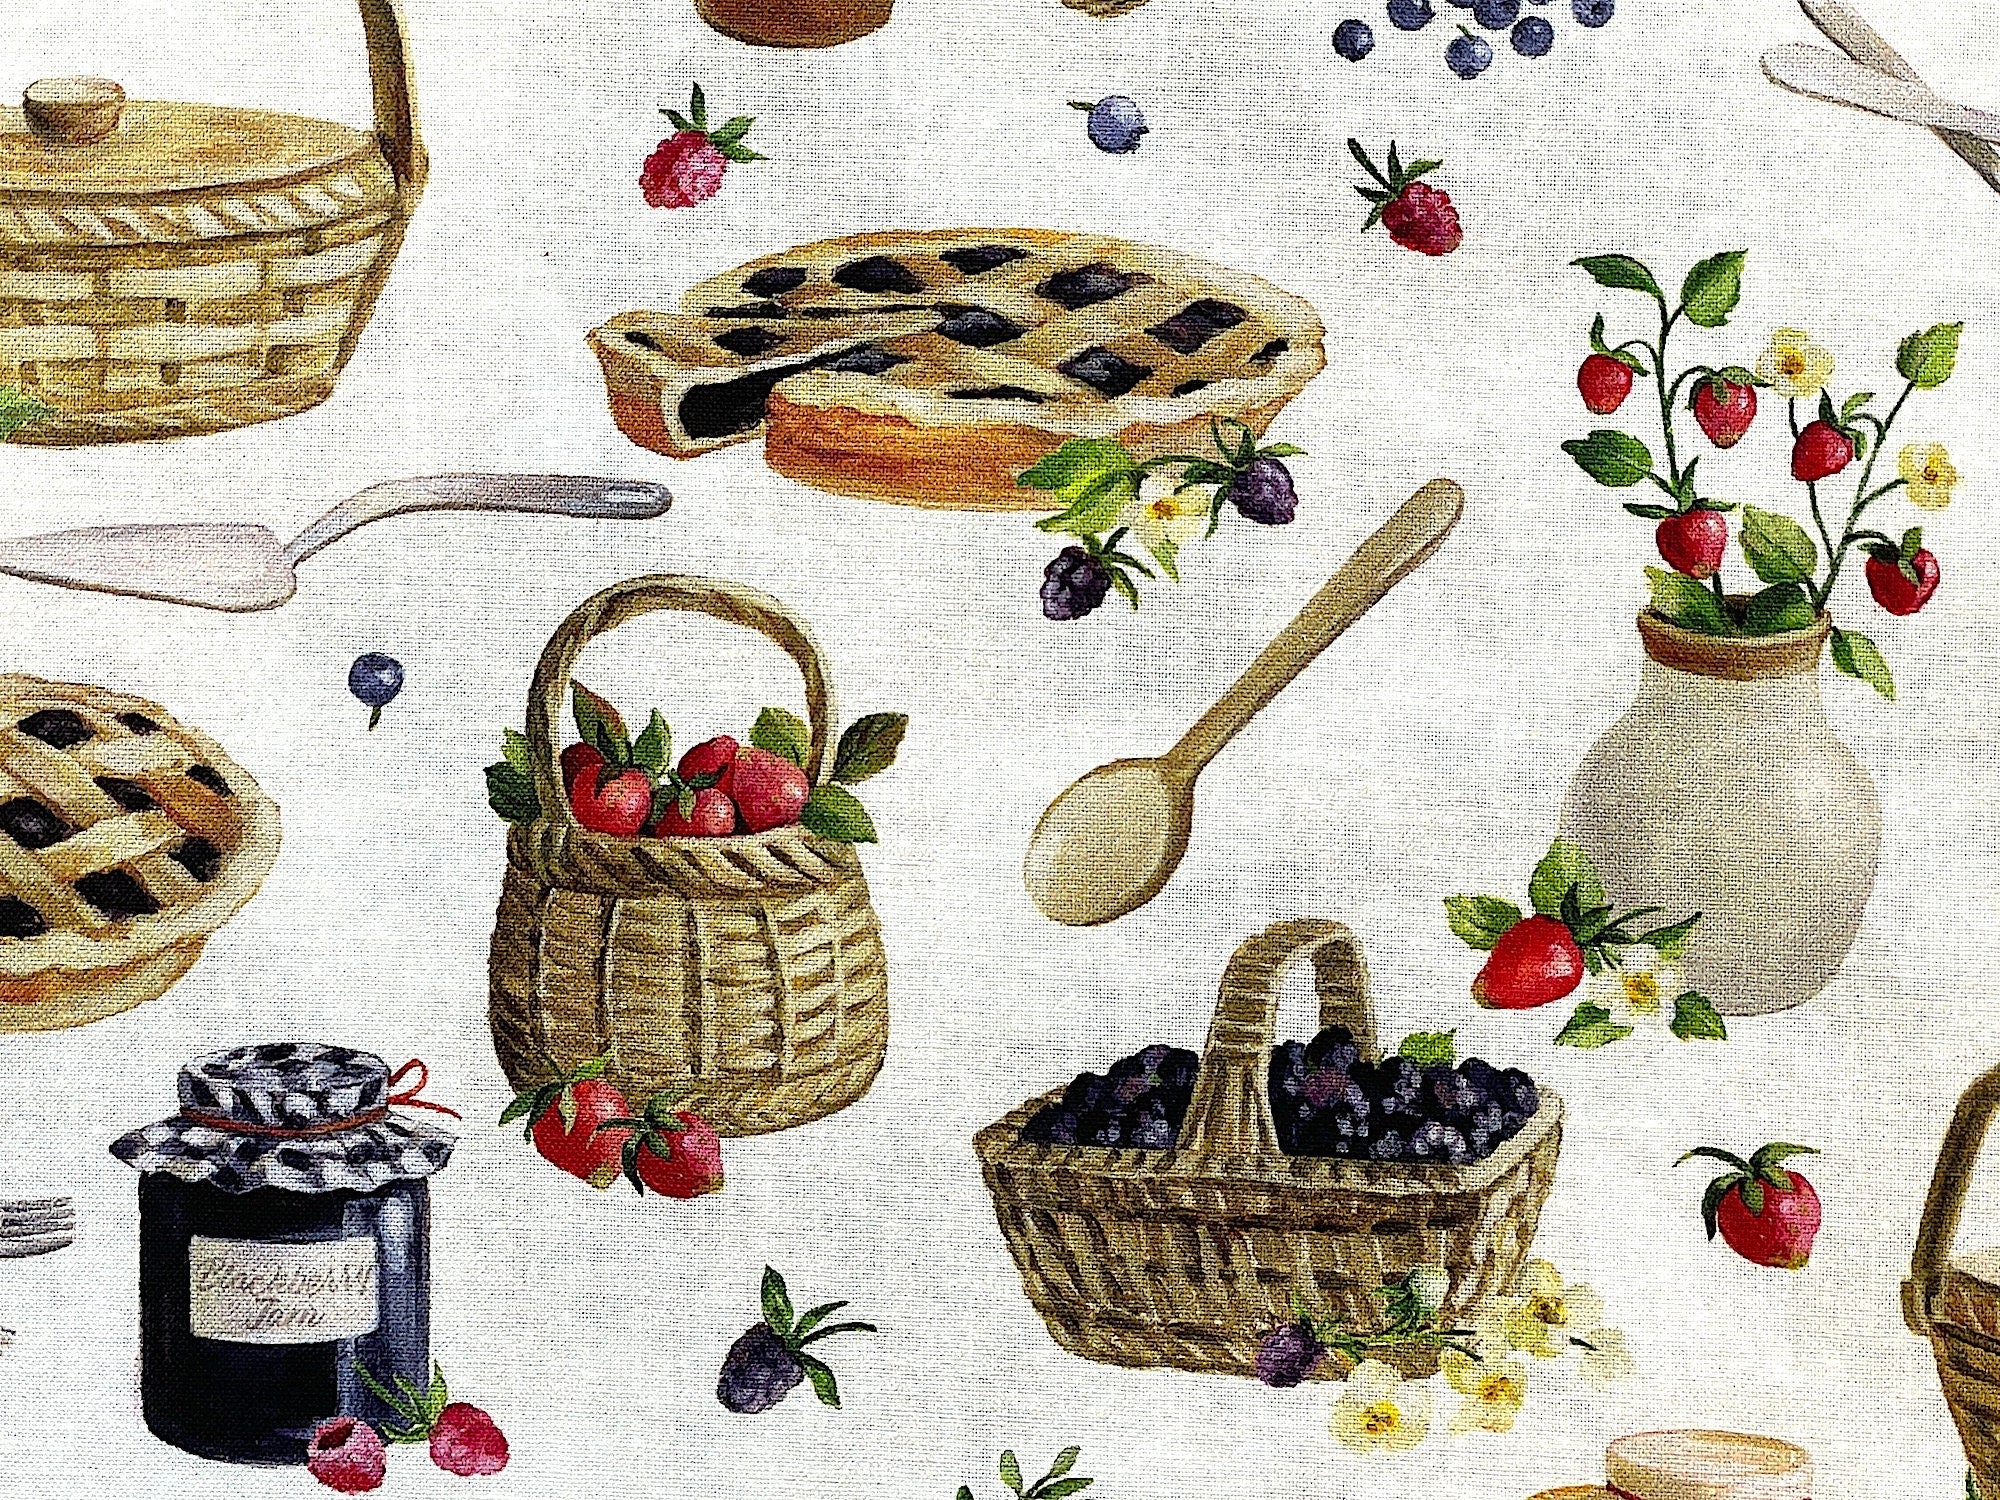 Close up of a basket of strawberries, basket of blueberries and a blueberry pie.